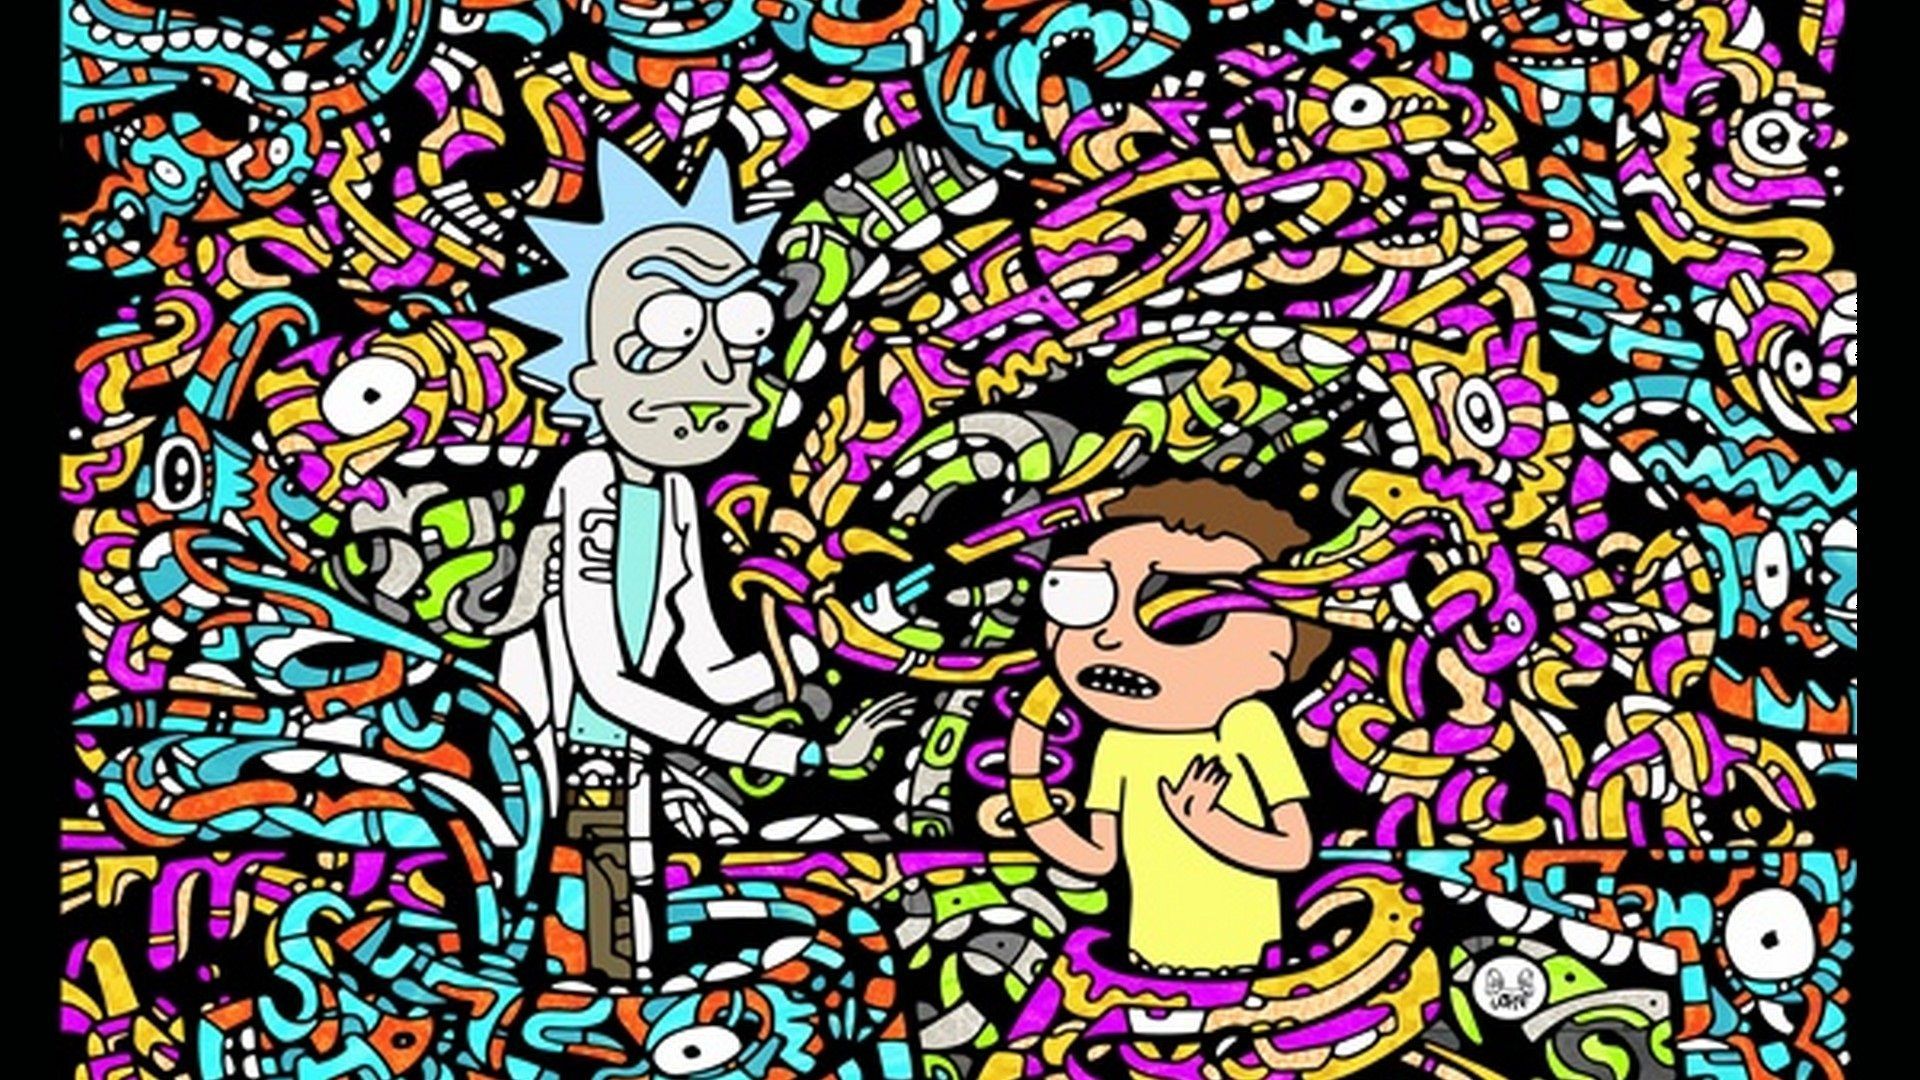 Rick and Morty Weed Wallpaper Free Rick and Morty Weed